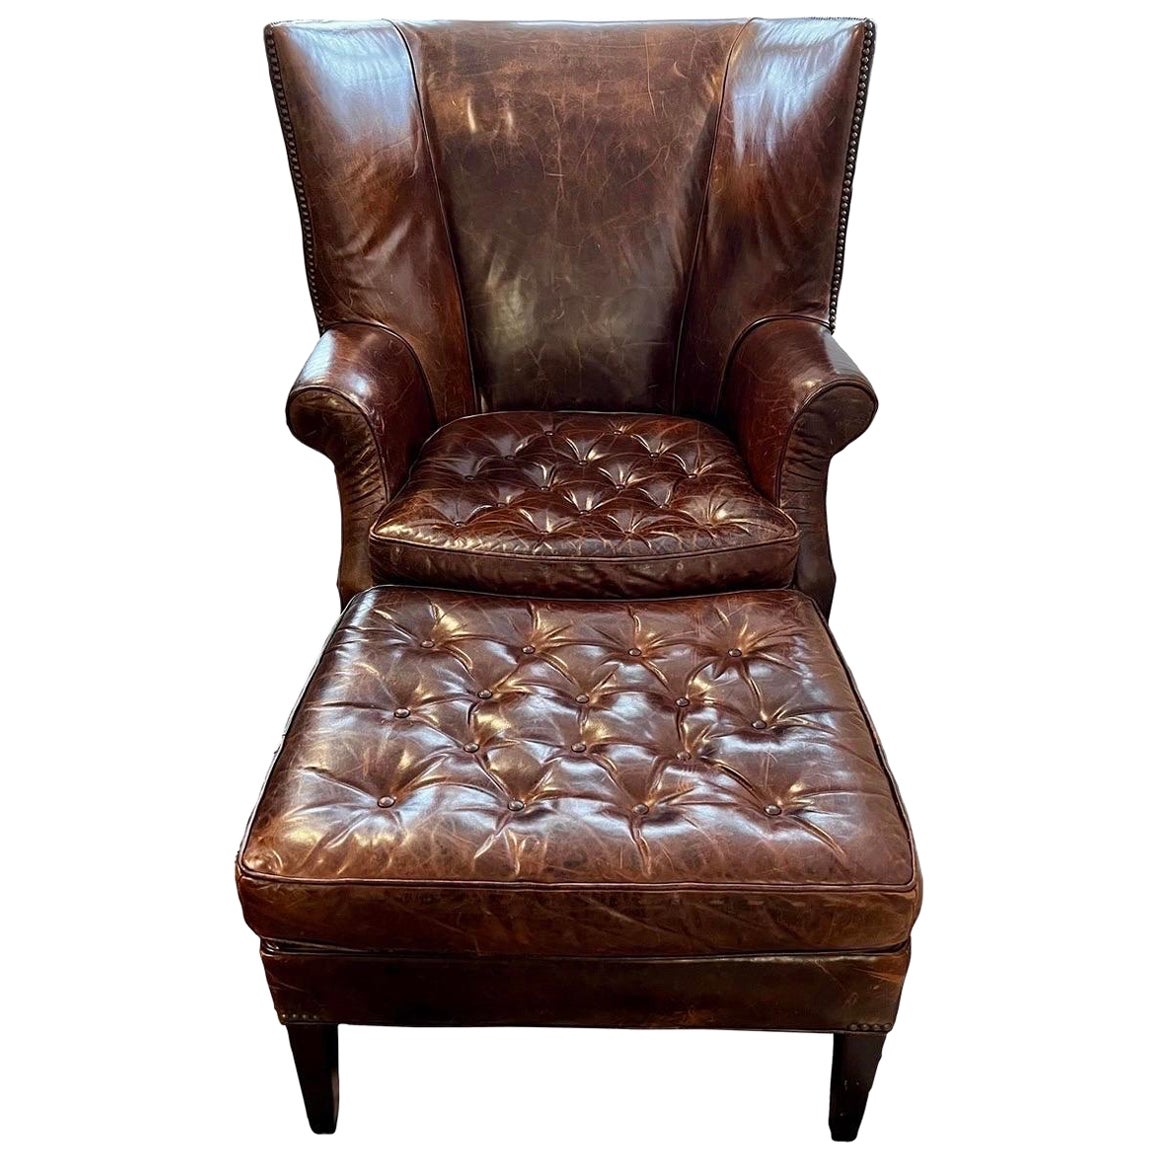  Distressed Brown Chesterfield Leather Wingback Chair & Matching Ottoman For Sale